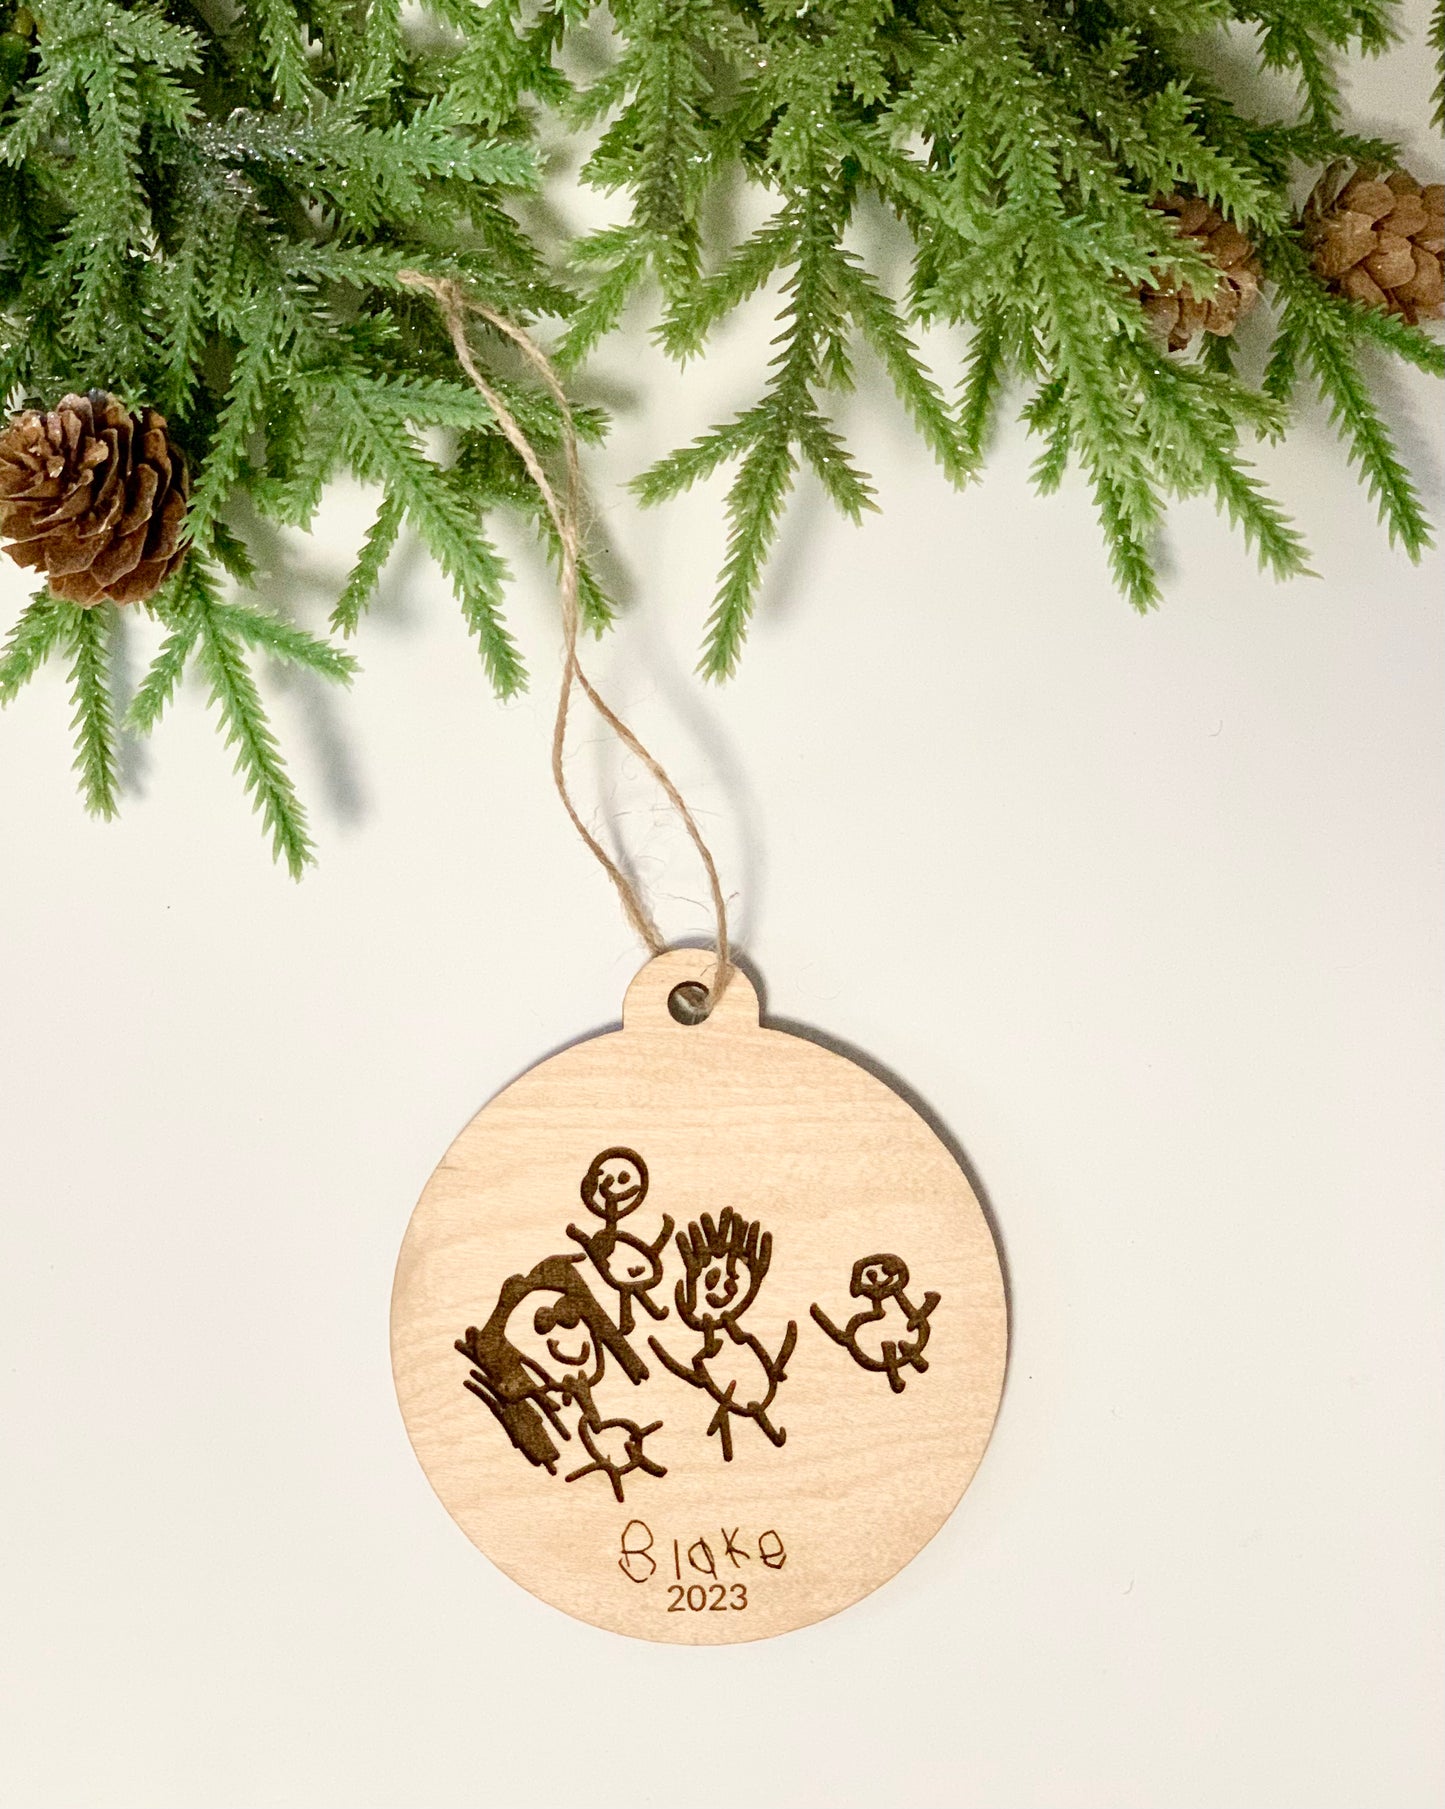 Child’s Drawing on a Christmas Ornament